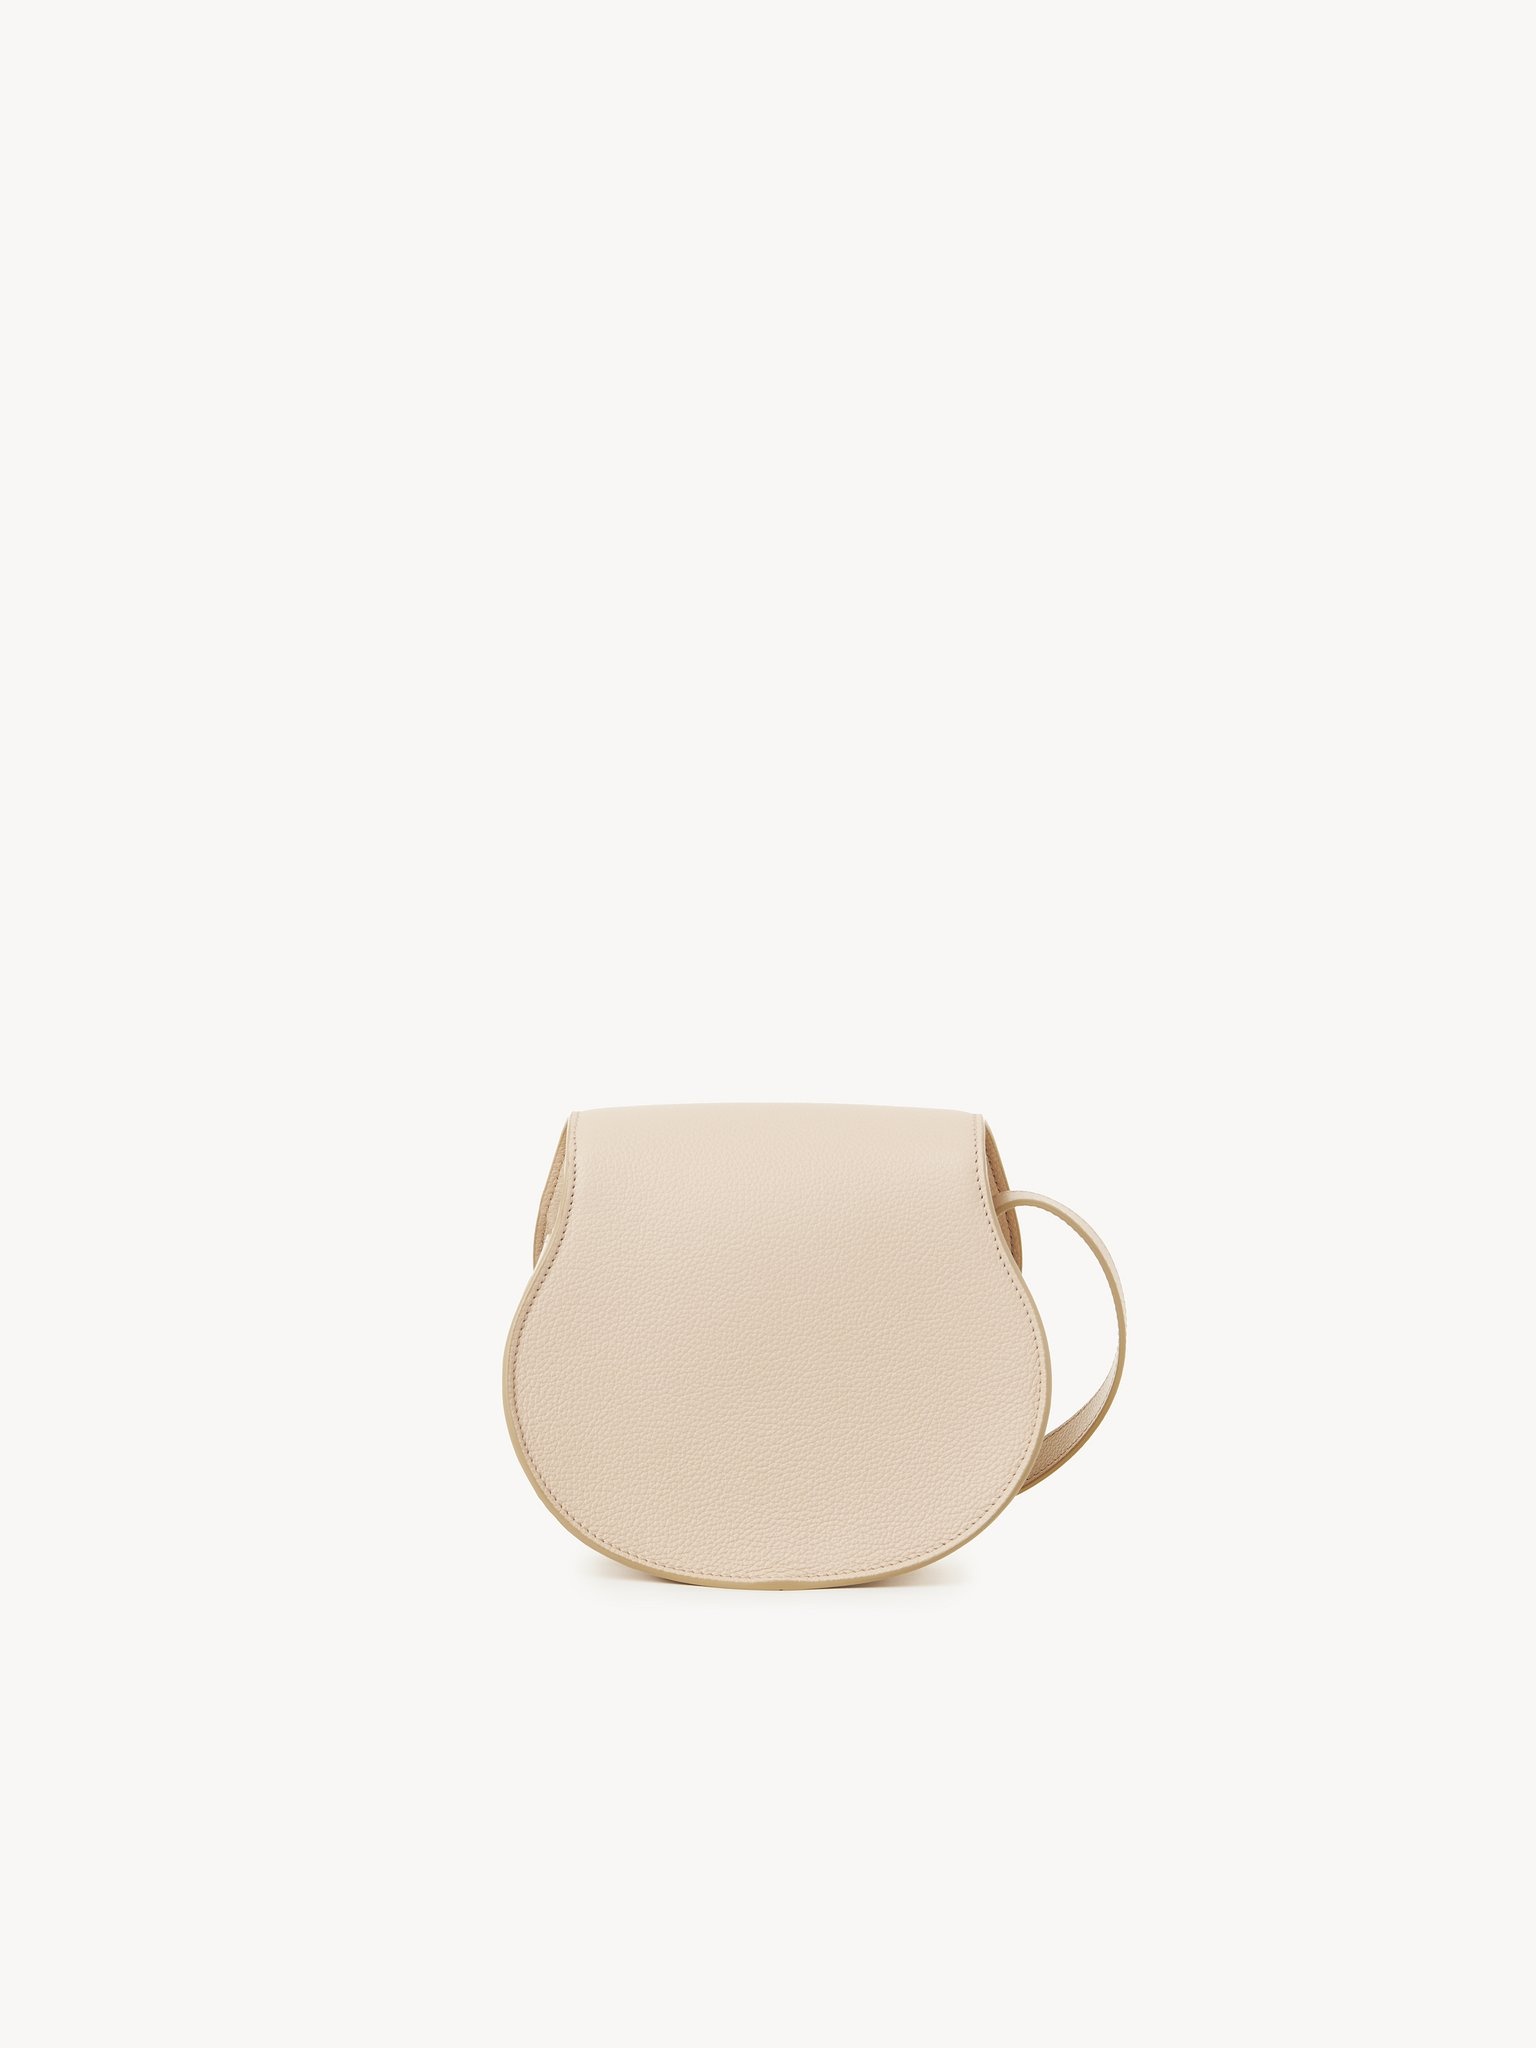 SMALL MARCIE SADDLE BAG IN GRAINED LEATHER - 4